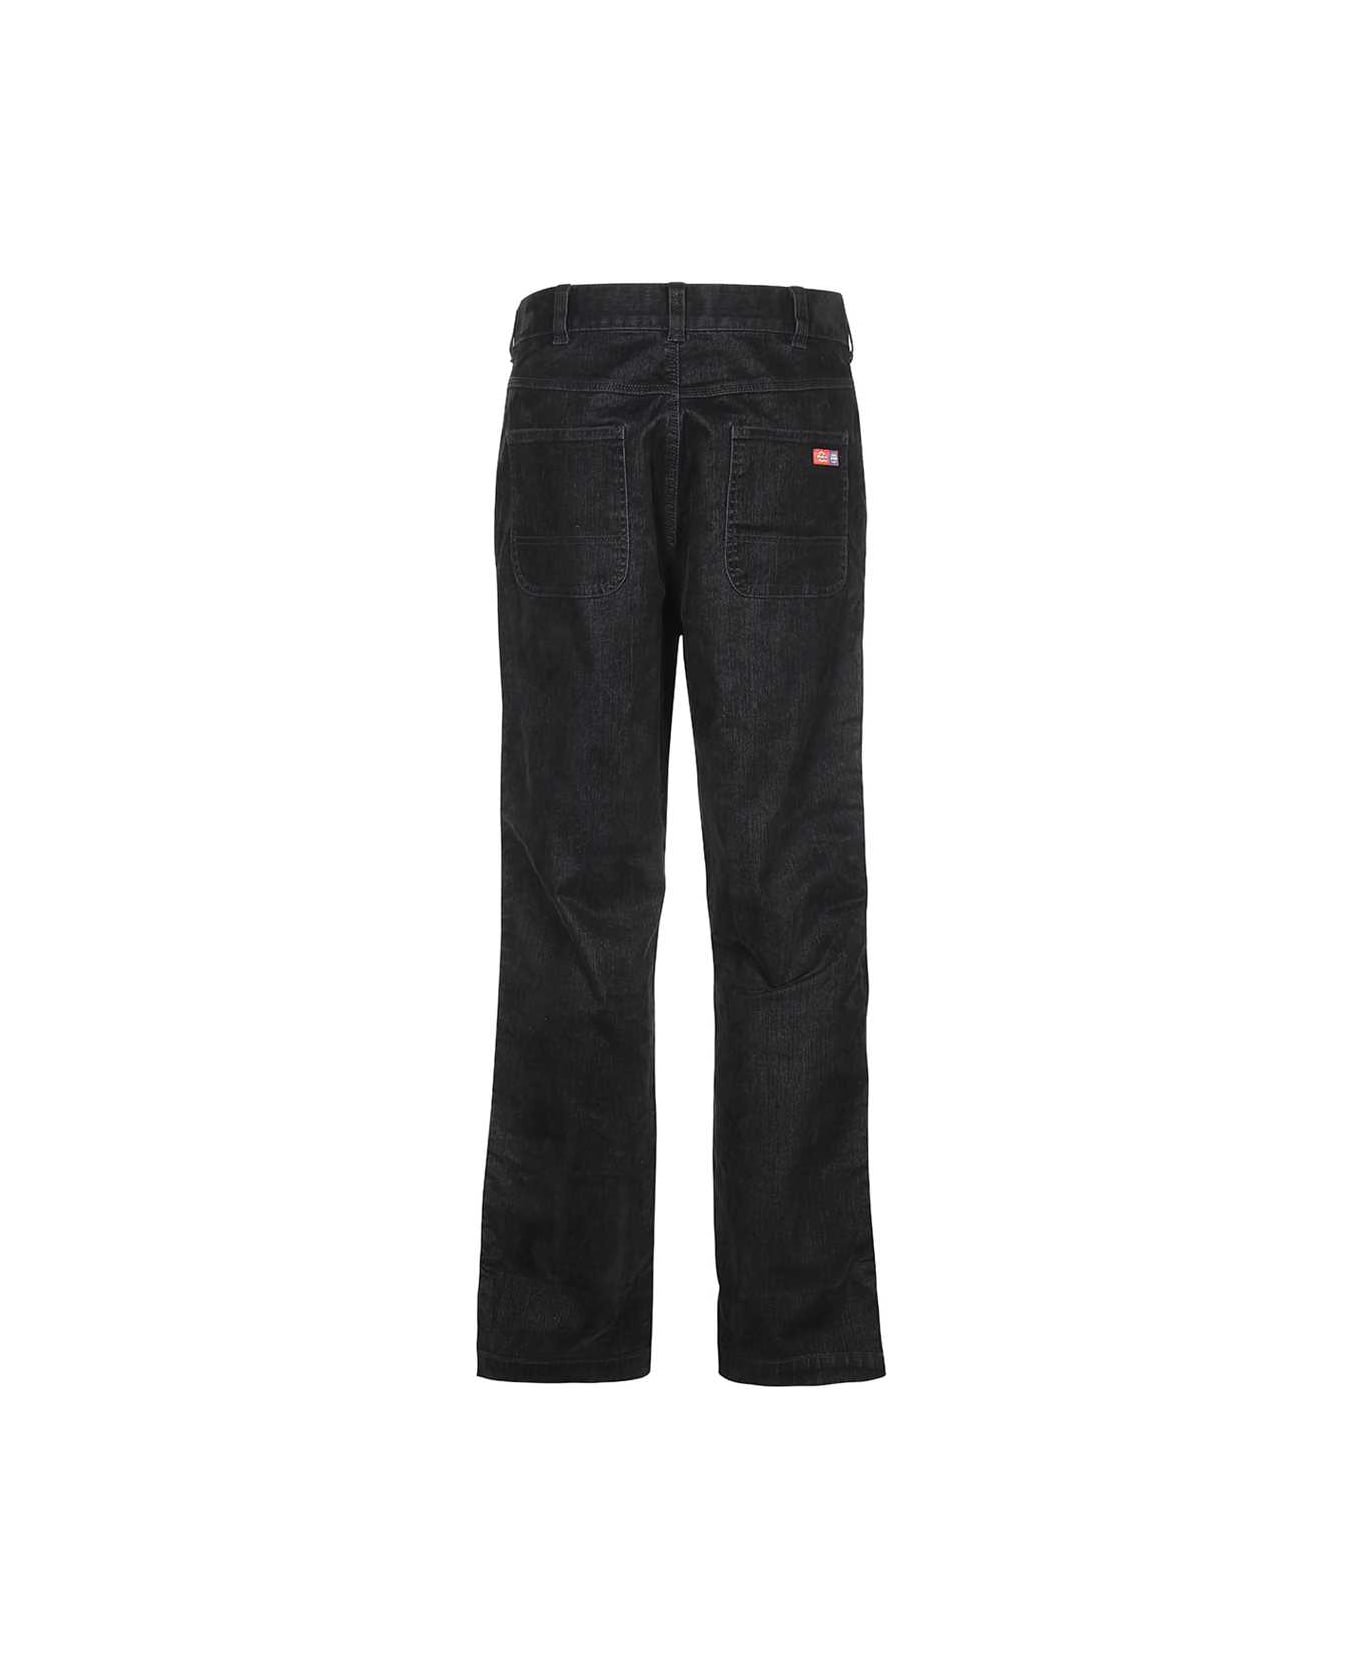 Dickies Cotton Trousers - black ボトムス